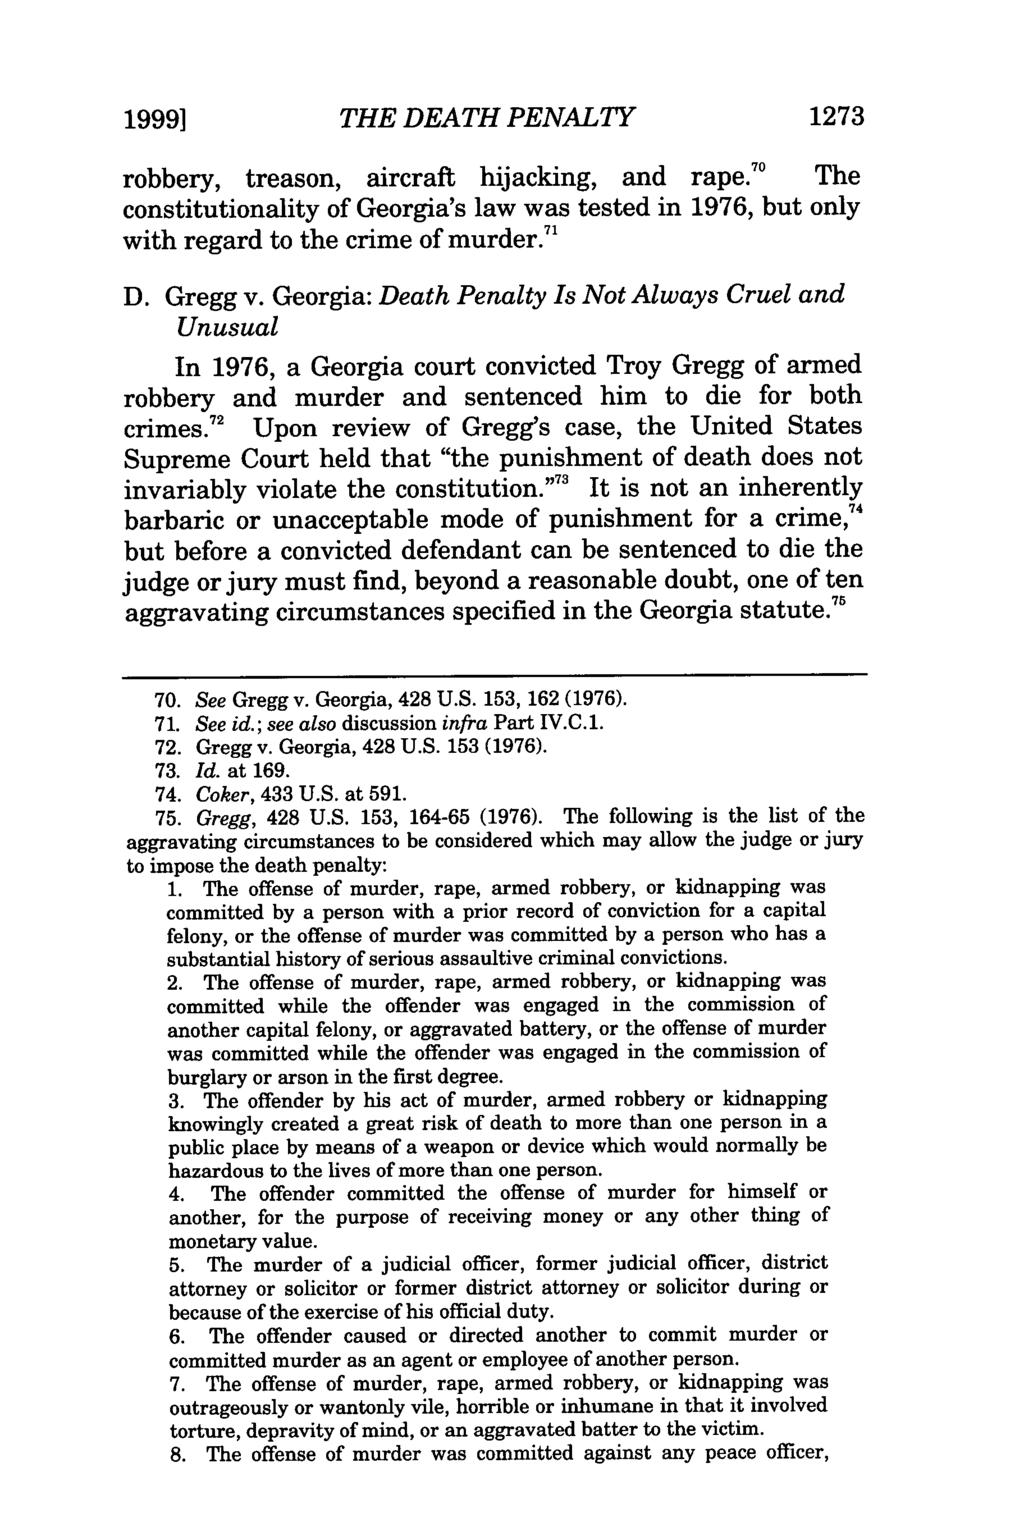 19991 THE DEATH PENALTY 1273 robbery, treason, aircraft hijacking, and rape. 0 The constitutionality of Georgia's law was tested in 1976, but only with regard to the crime of murder.' D. Gregg v.